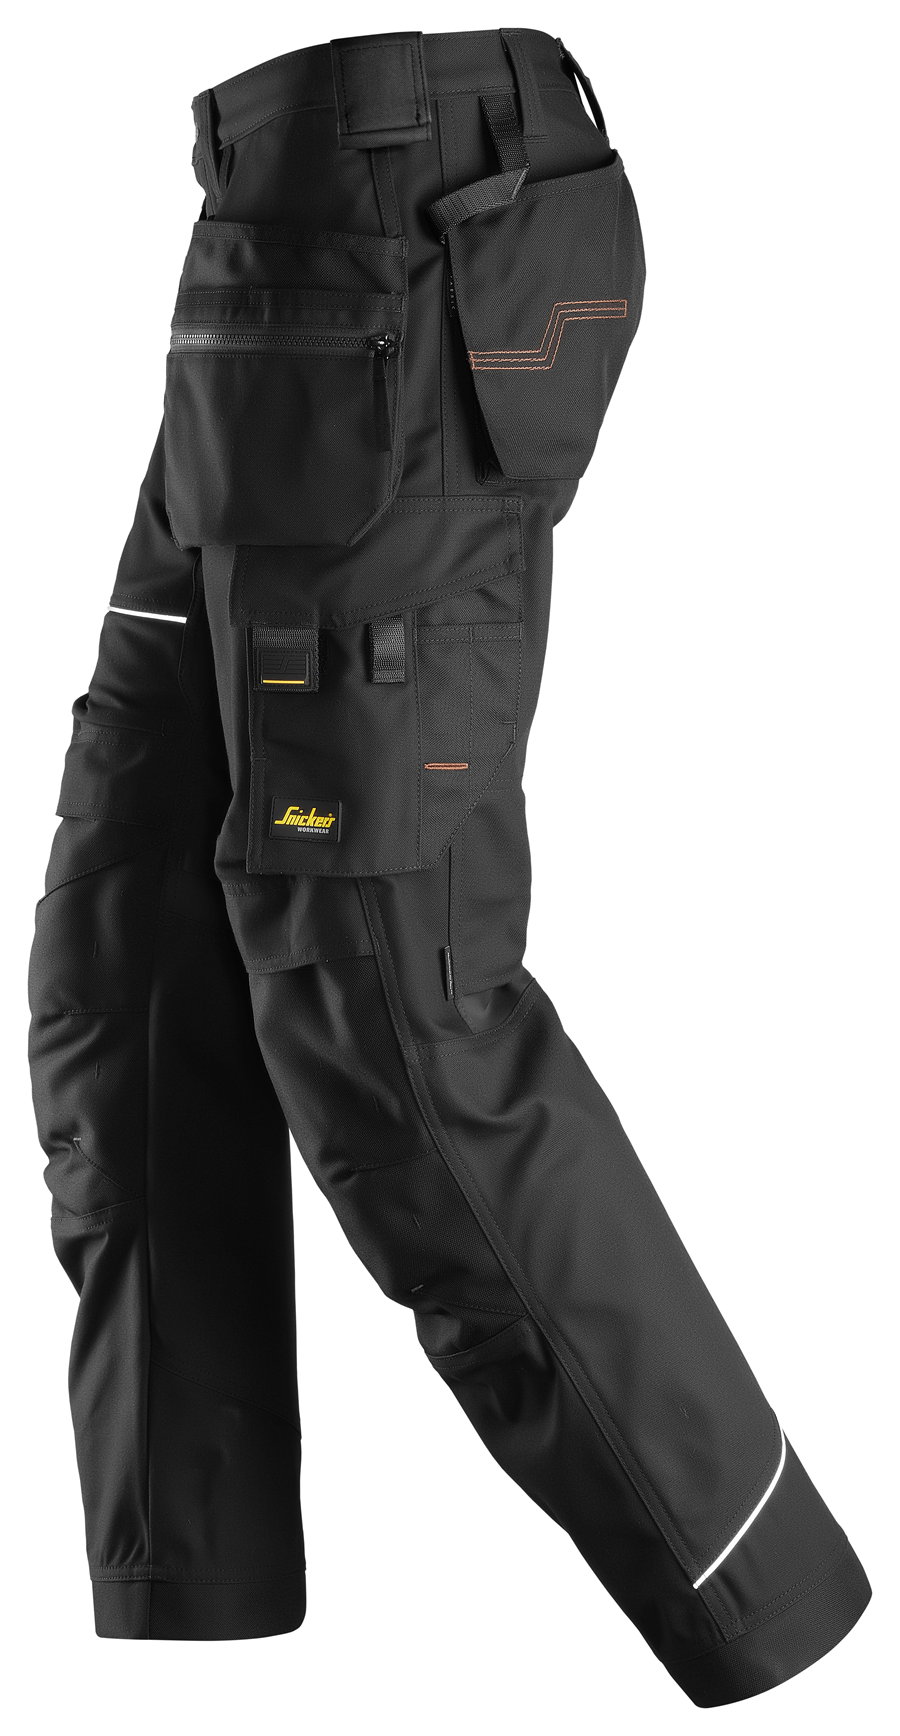 Snickers 6940 FlexiWork, Stretch Work Knee Pad Holster Pocket Trousers |  eBay